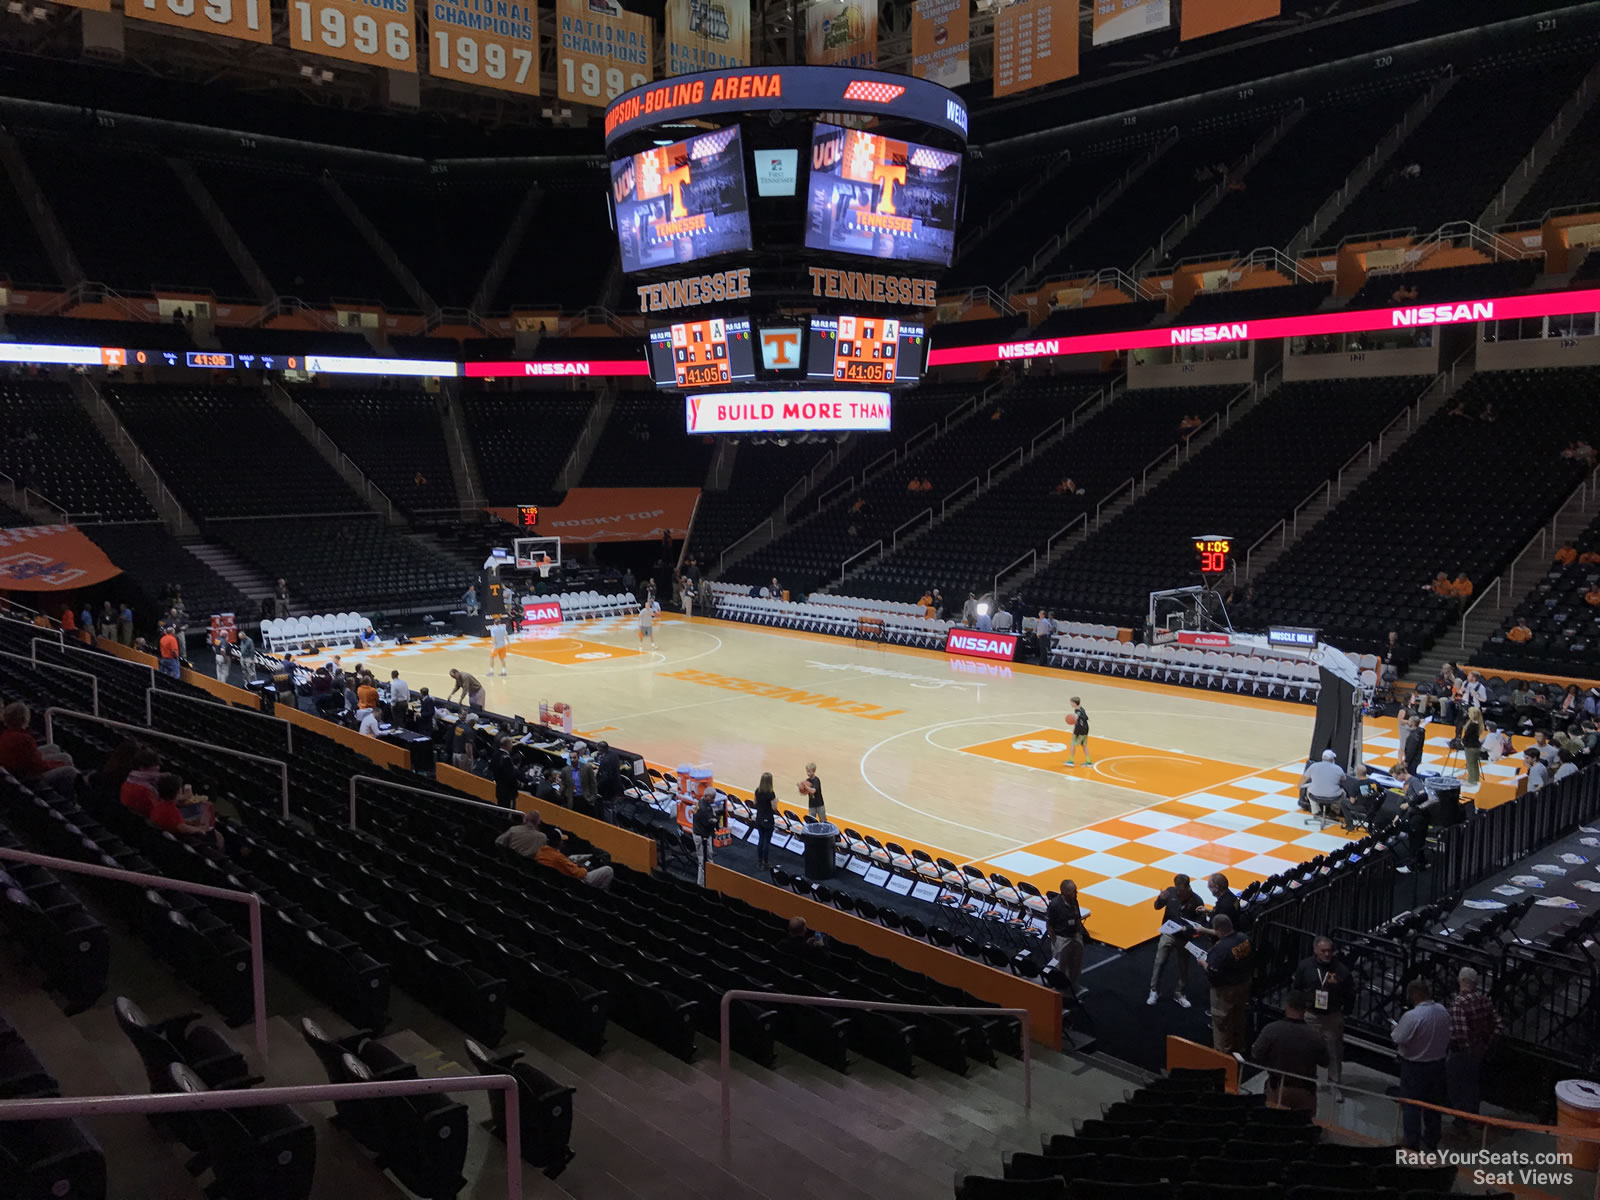 section 101, row 17 seat view  - thompson-boling arena